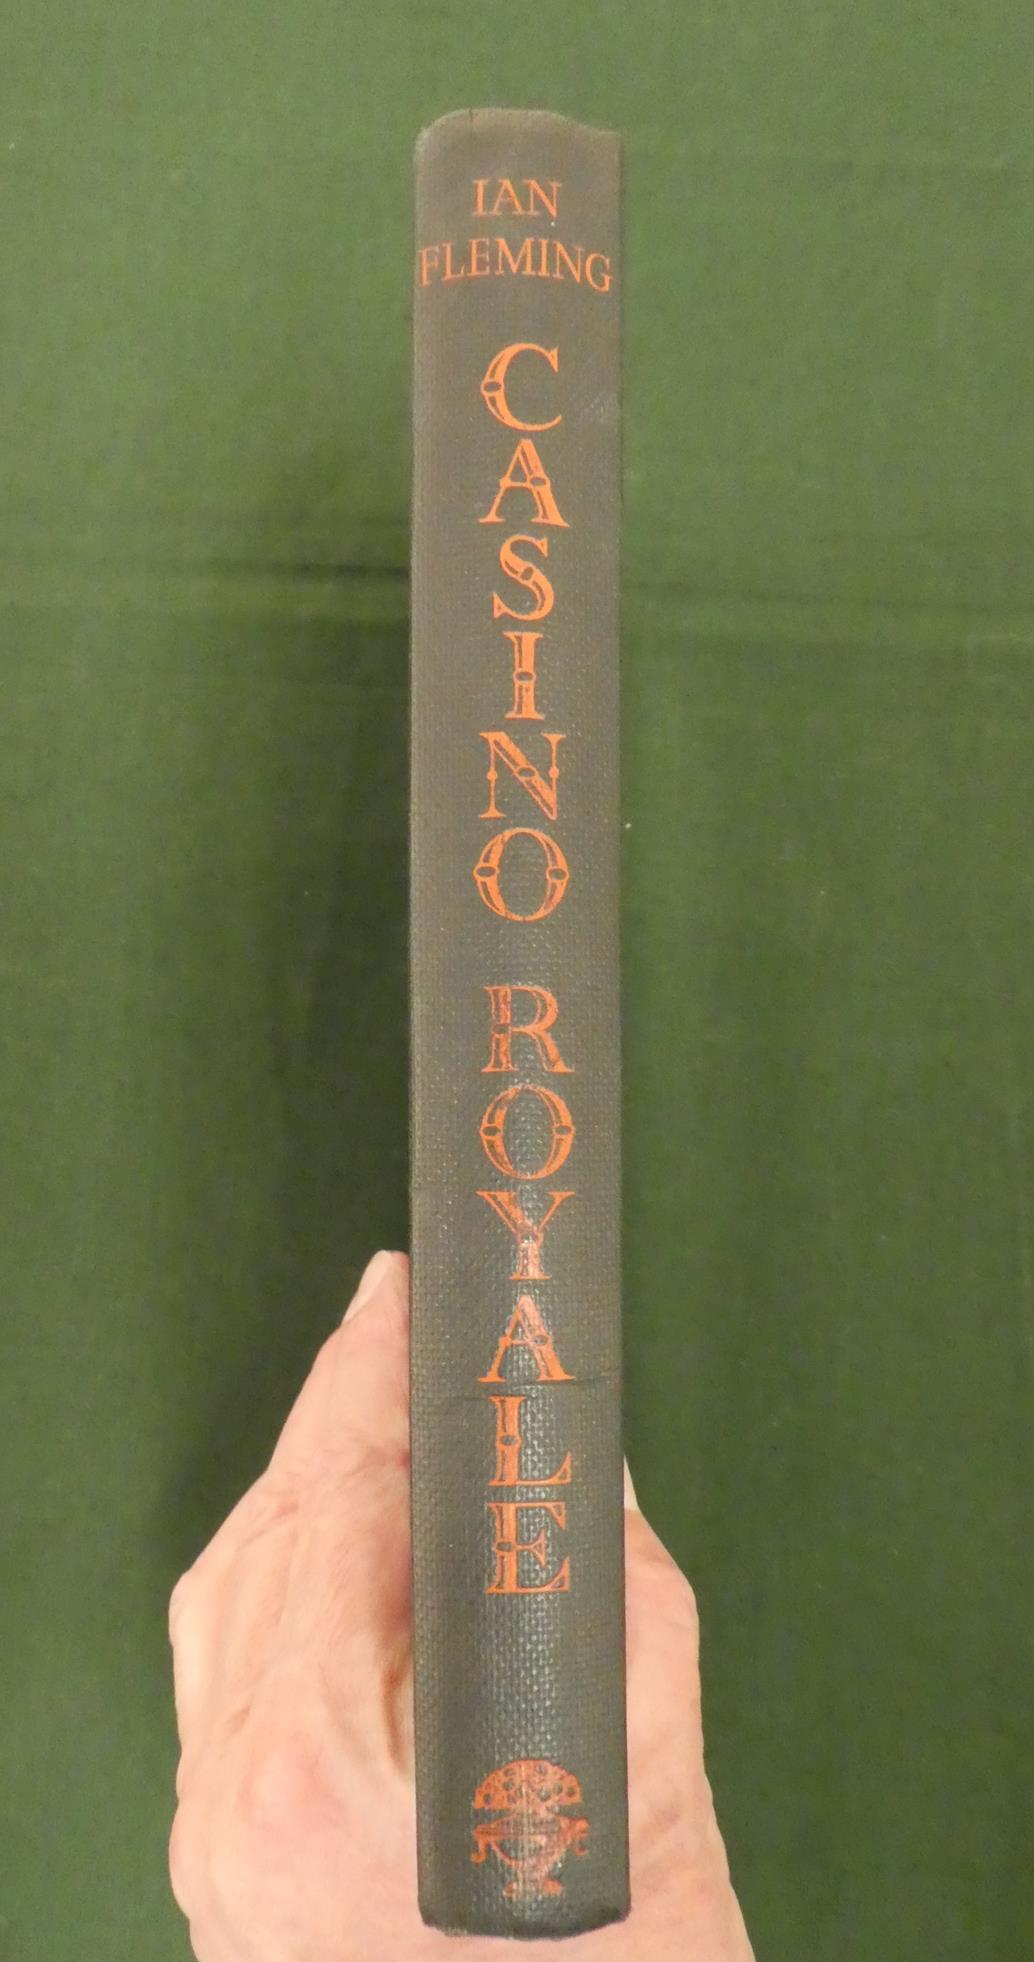 Fleming (Ian) Casino Royale, Cape, 1953, first edition, H.M.S Dolphin stamp and ink number to - Image 3 of 8